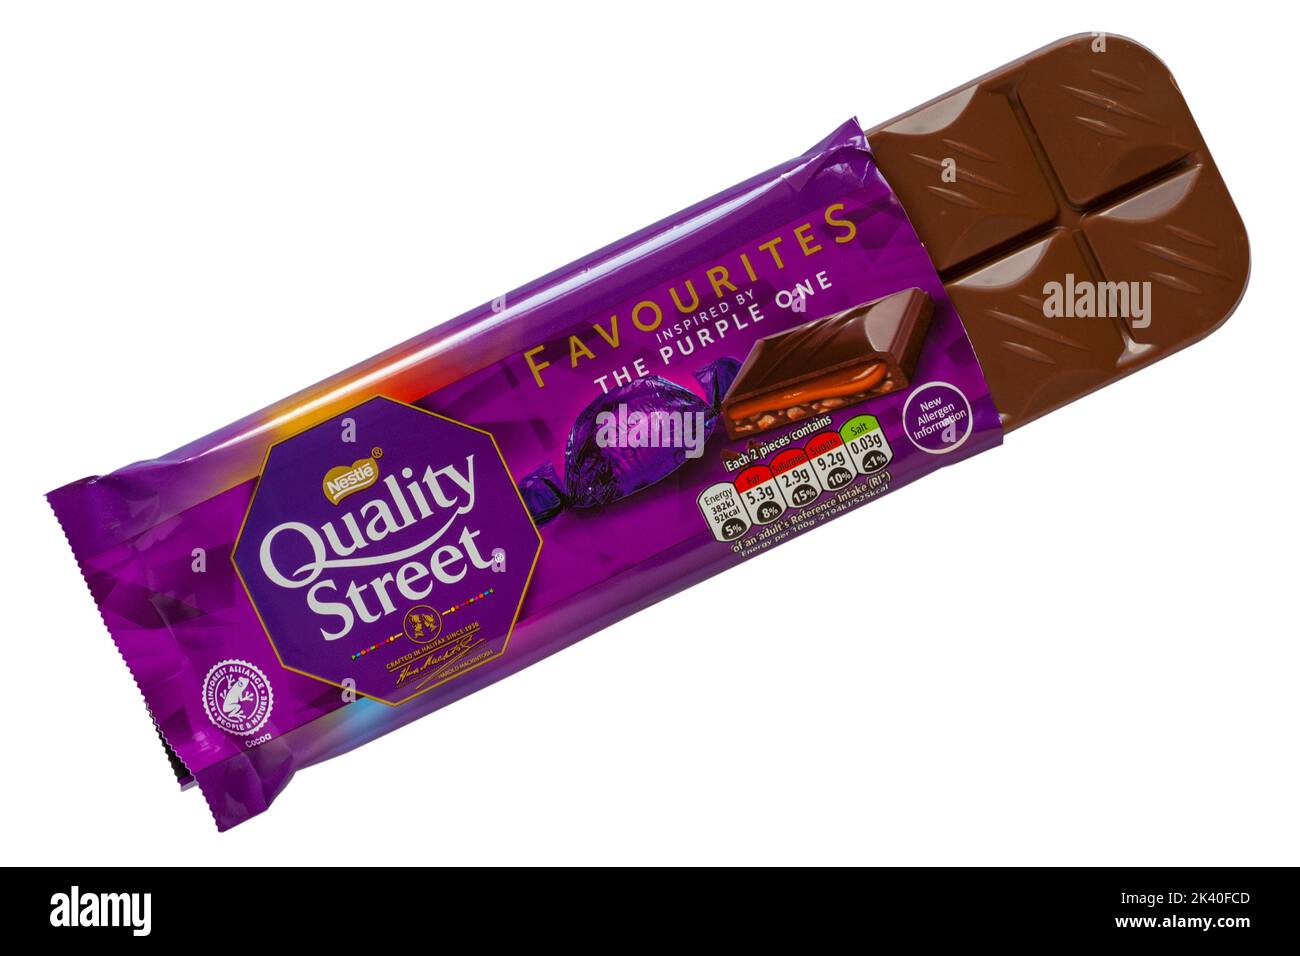 Bar of Quality Street Favourites inspired by the Purple One chocolate bar of chocolate from Nestle opened to show content isolated on white background Stock Photo